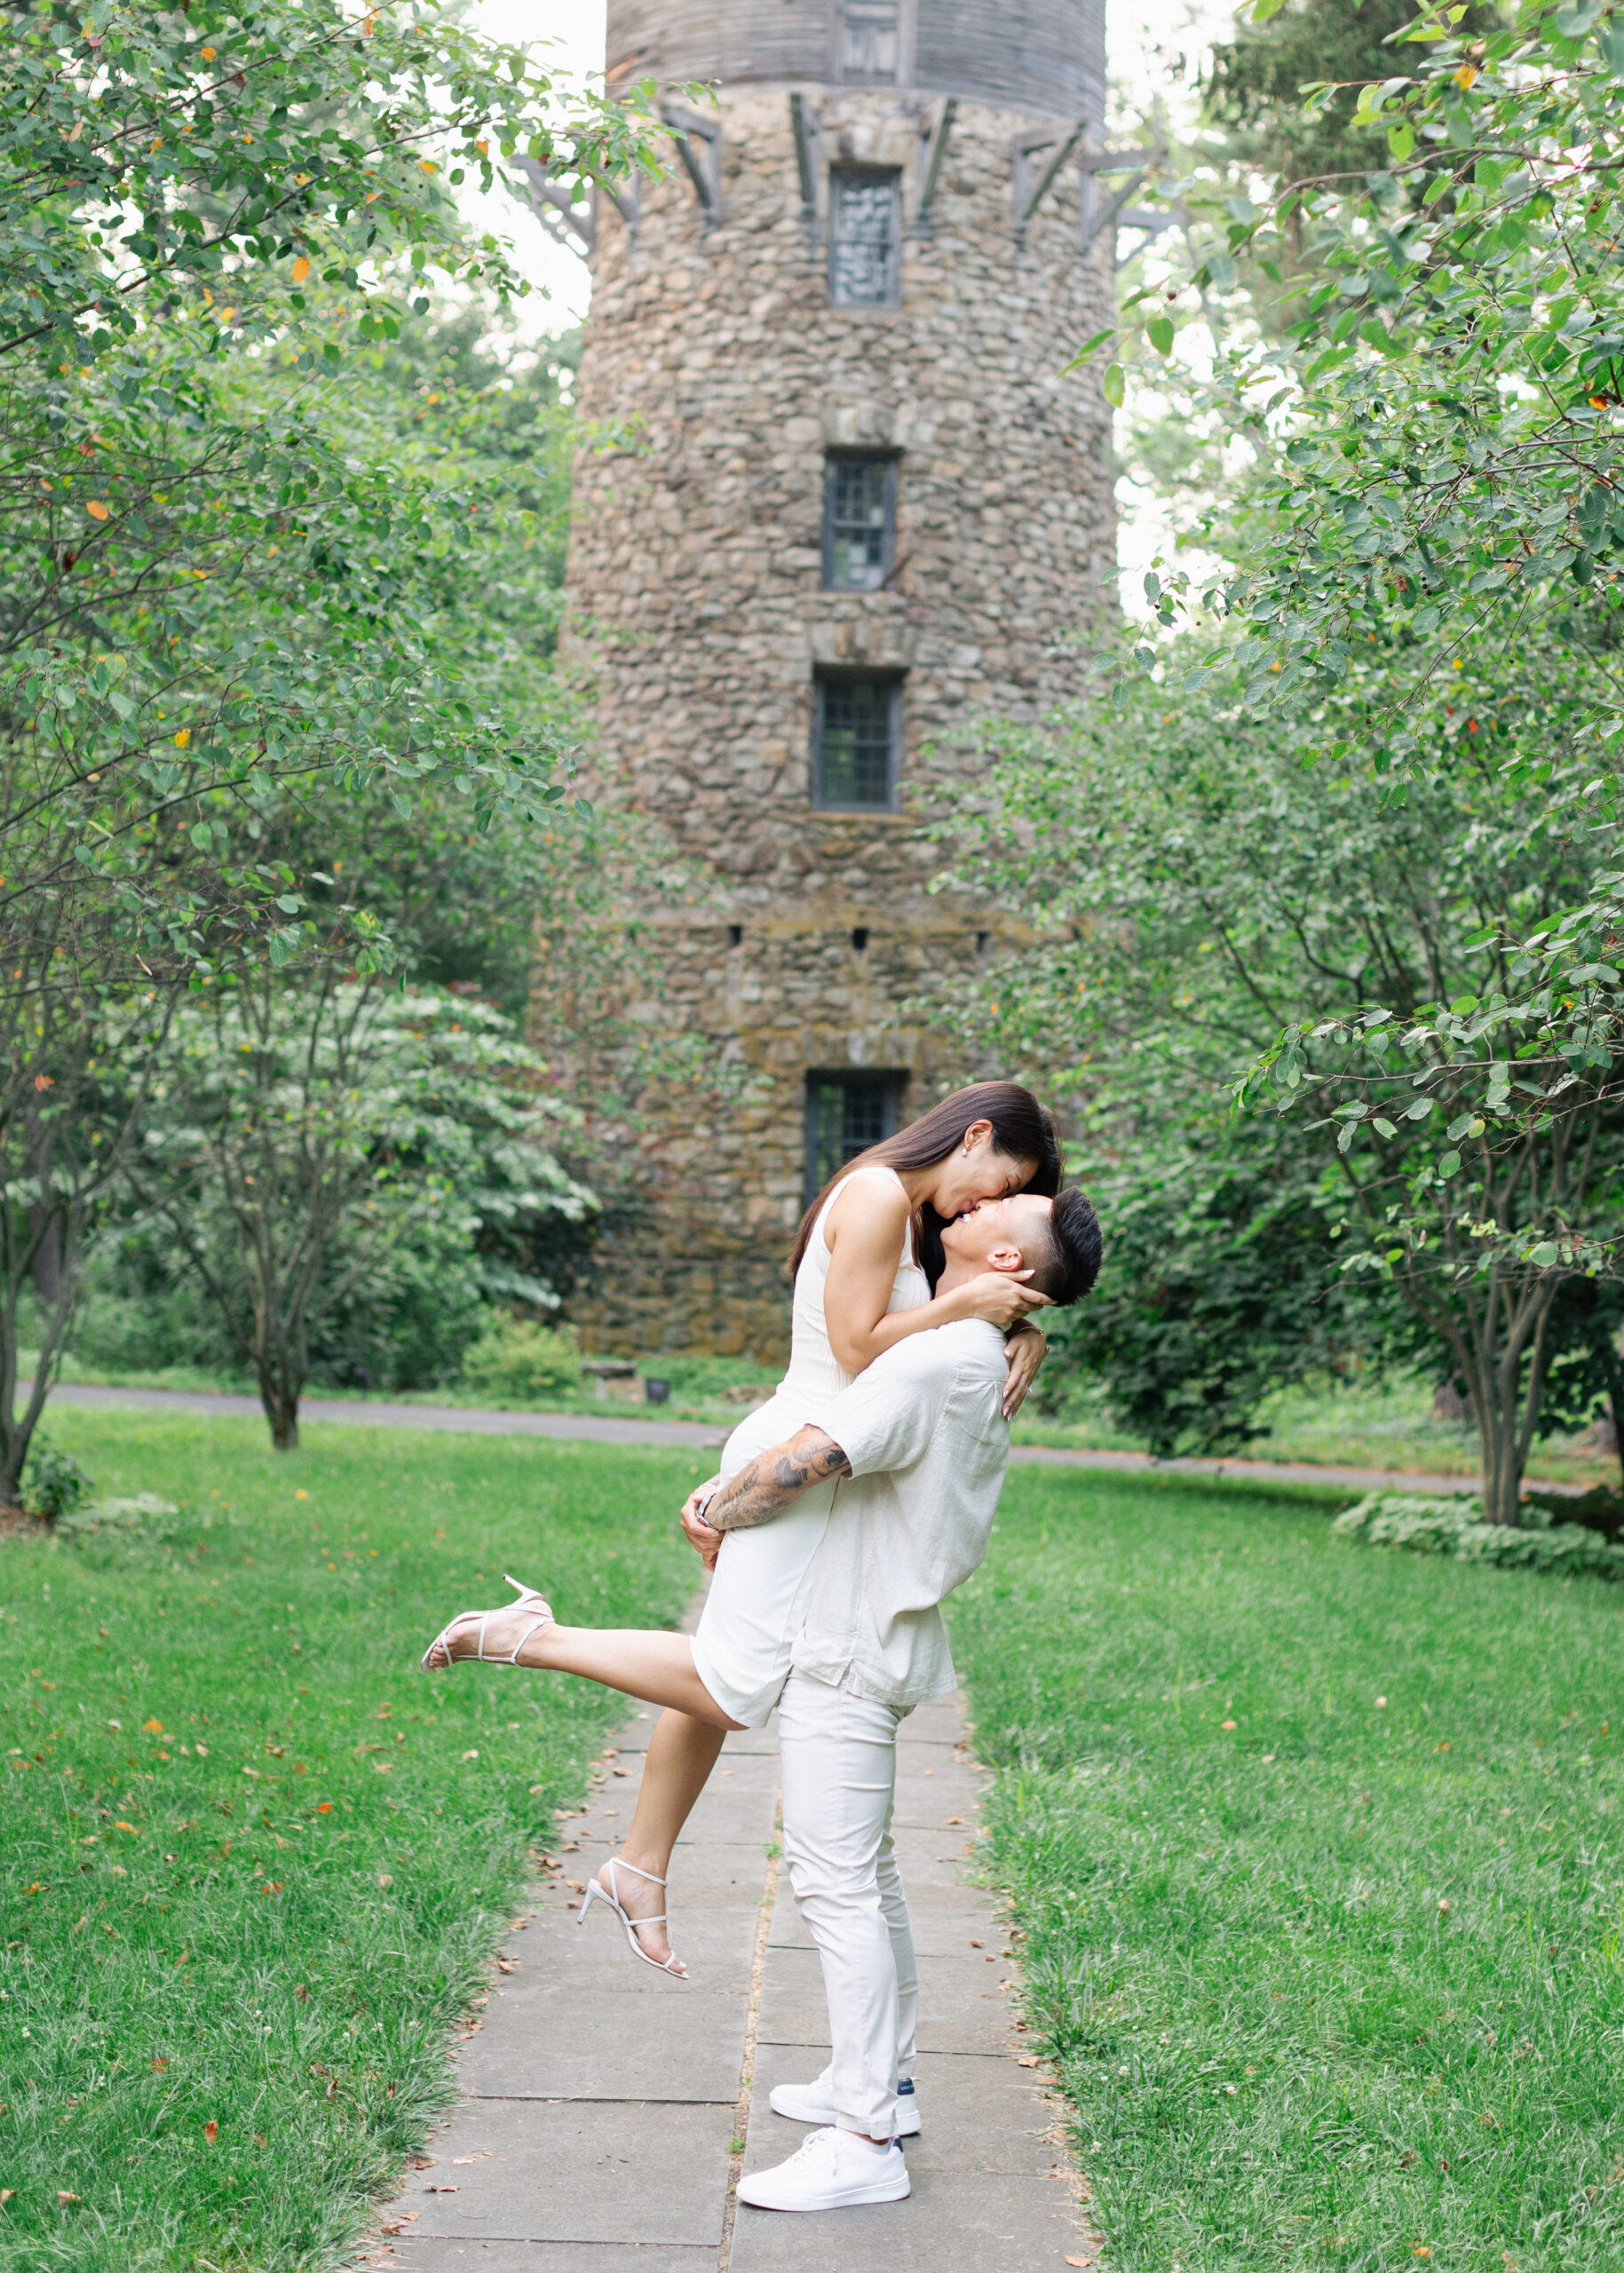 engaged couple lifting up girl in front of stone tower garden